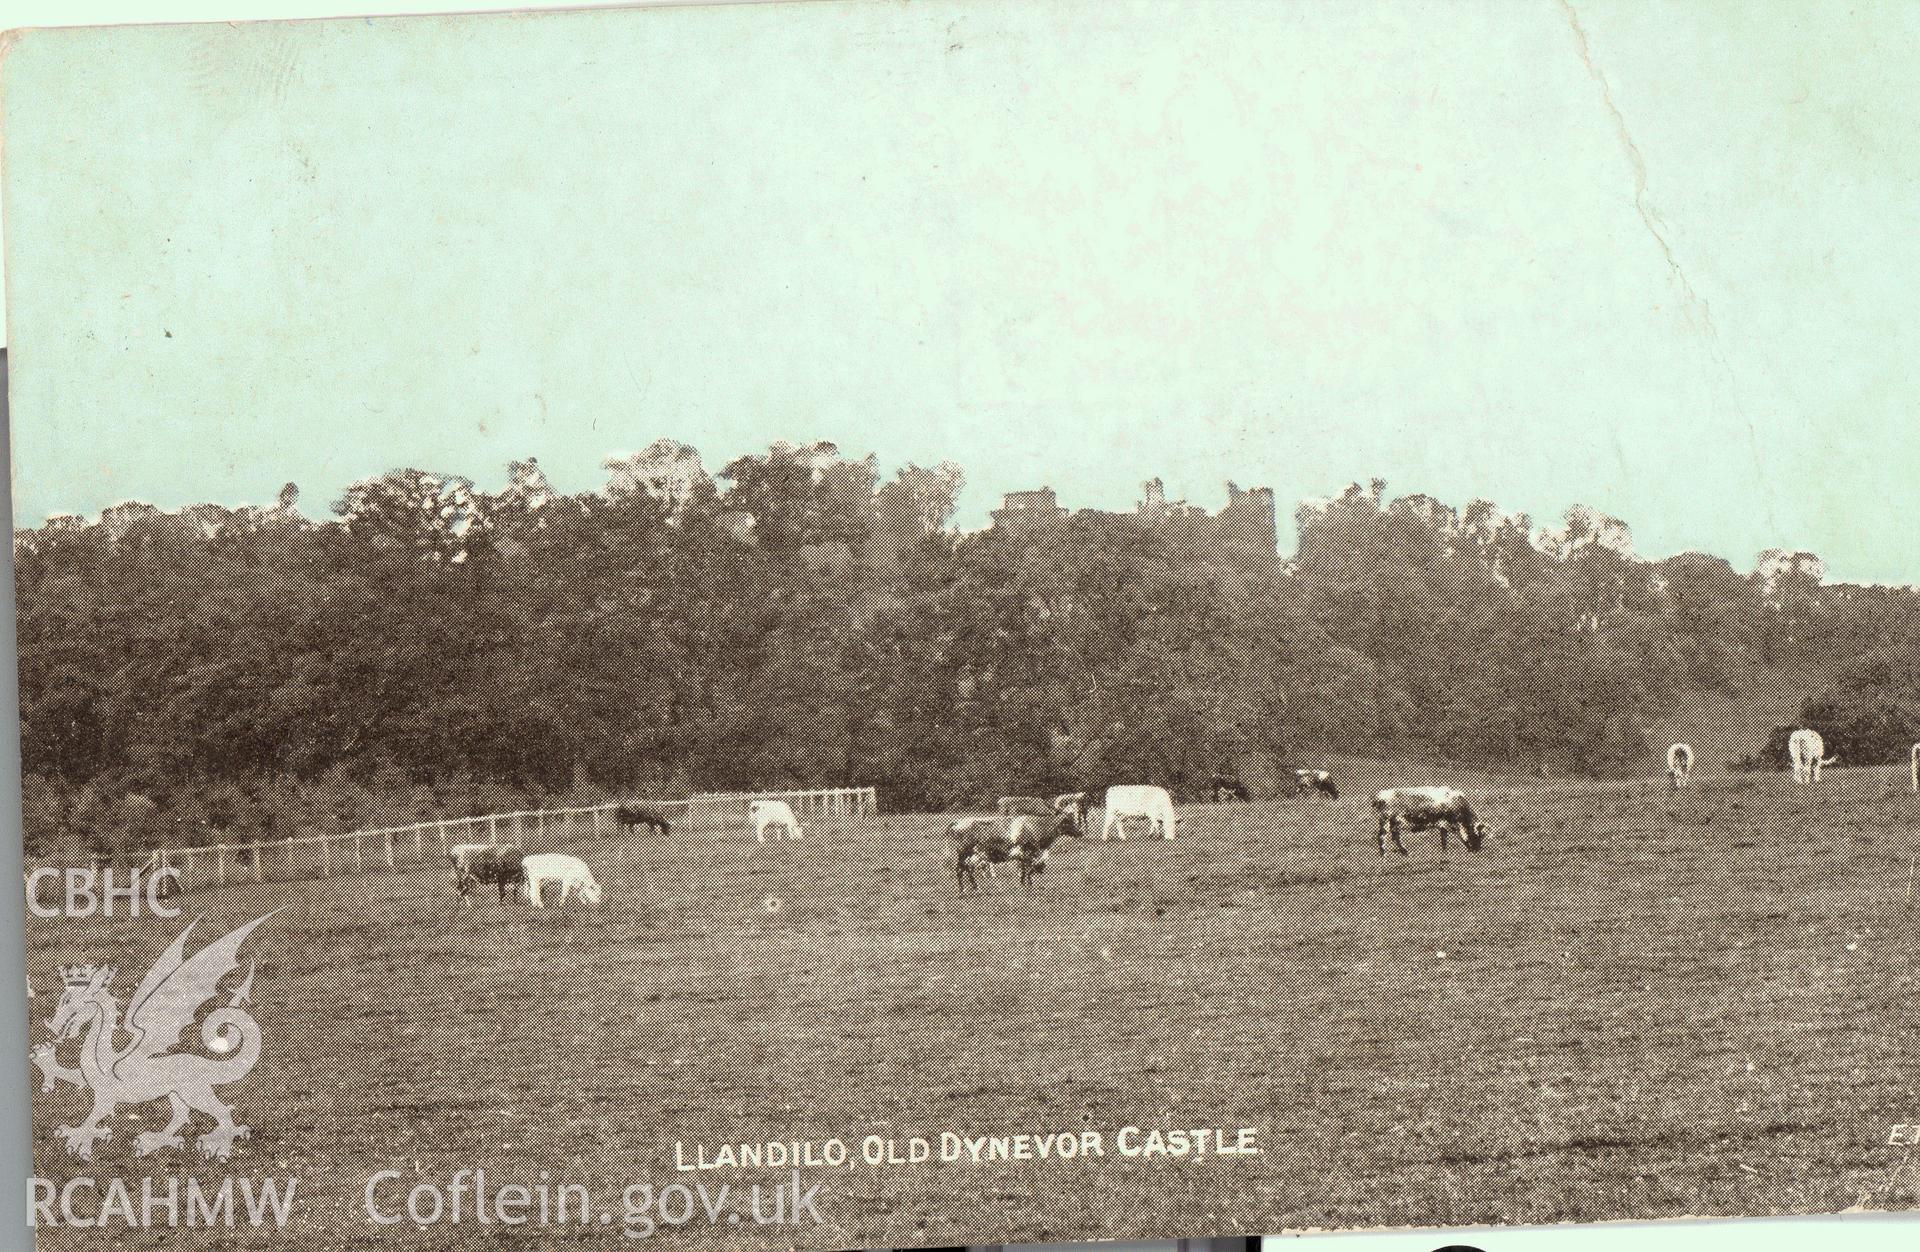 Digitised postcard image of Dinefor Castle grounds, Llandeilo, Dainty Series E.T.W. Dennis and Sons, Ltd., London and Scarborough. Produced by Parks and Gardens Data Services, from an original item in the Peter Davis Collection at Parks and Gardens UK. We hold only web-resolution images of this collection, suitable for viewing on screen and for research purposes only. We do not hold the original images, or publication quality scans.